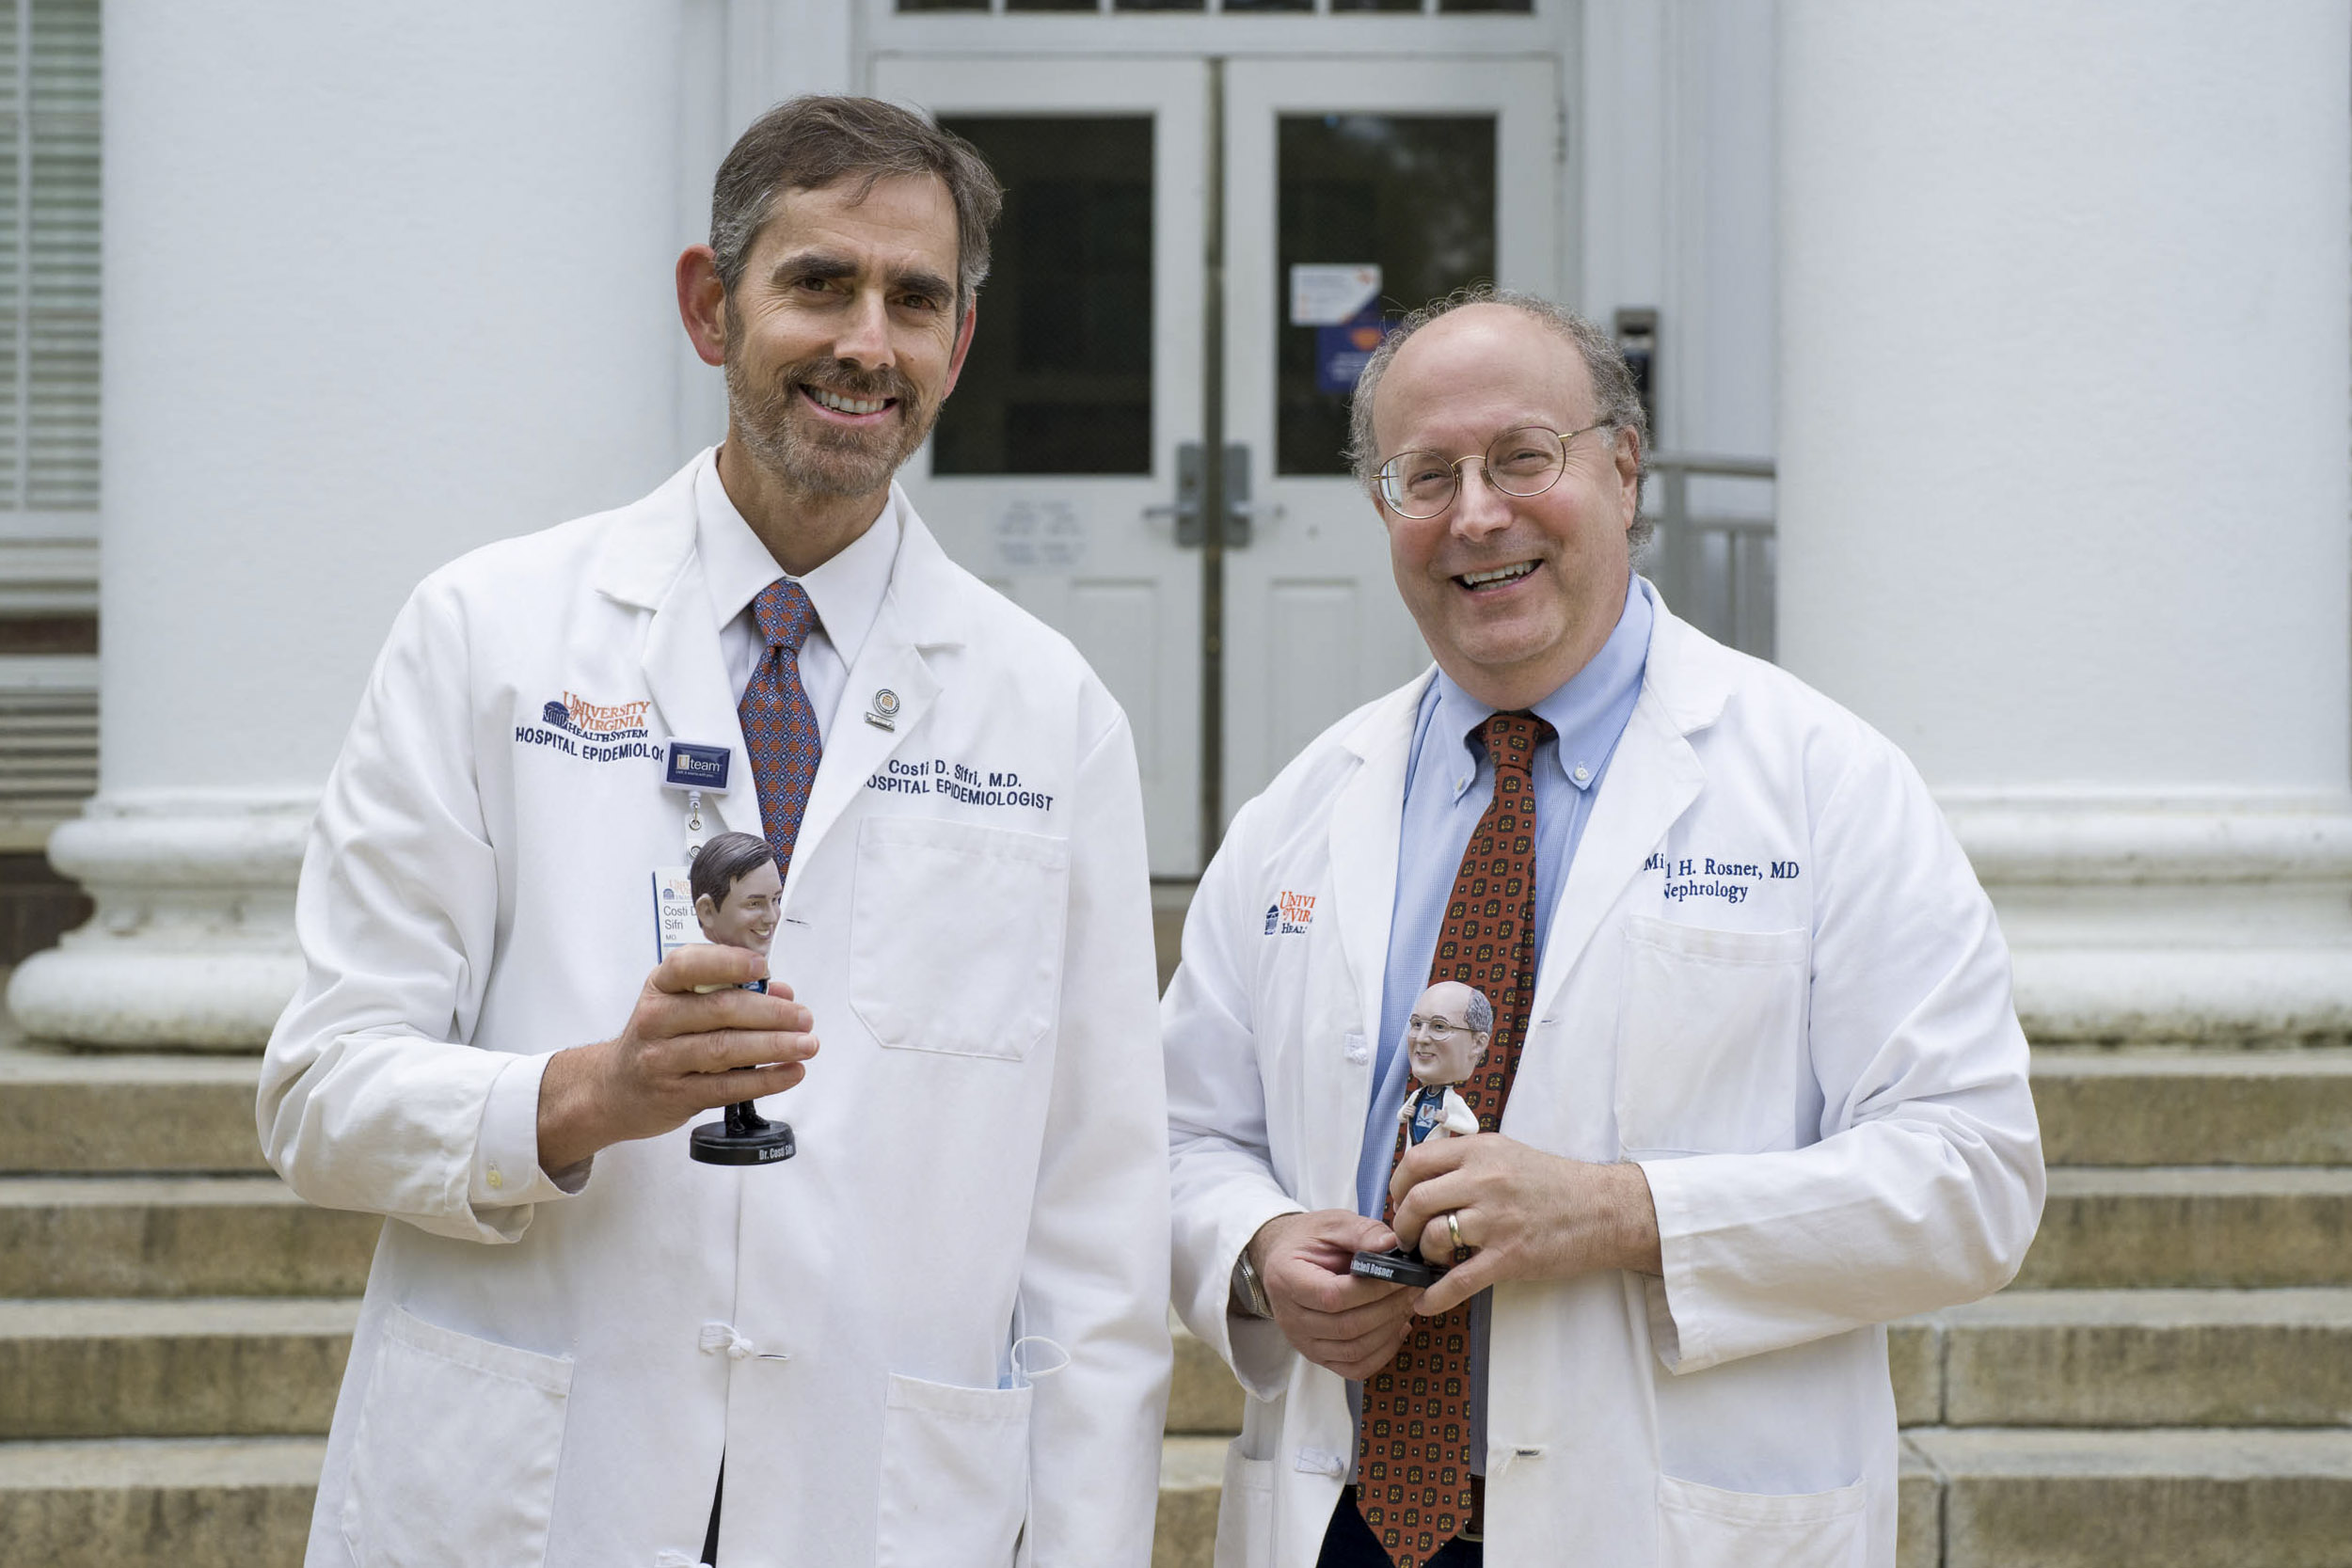 Dr. Costi Sifri, left, and Dr. Mitch Rosner, right, hold bobble heads of themselves